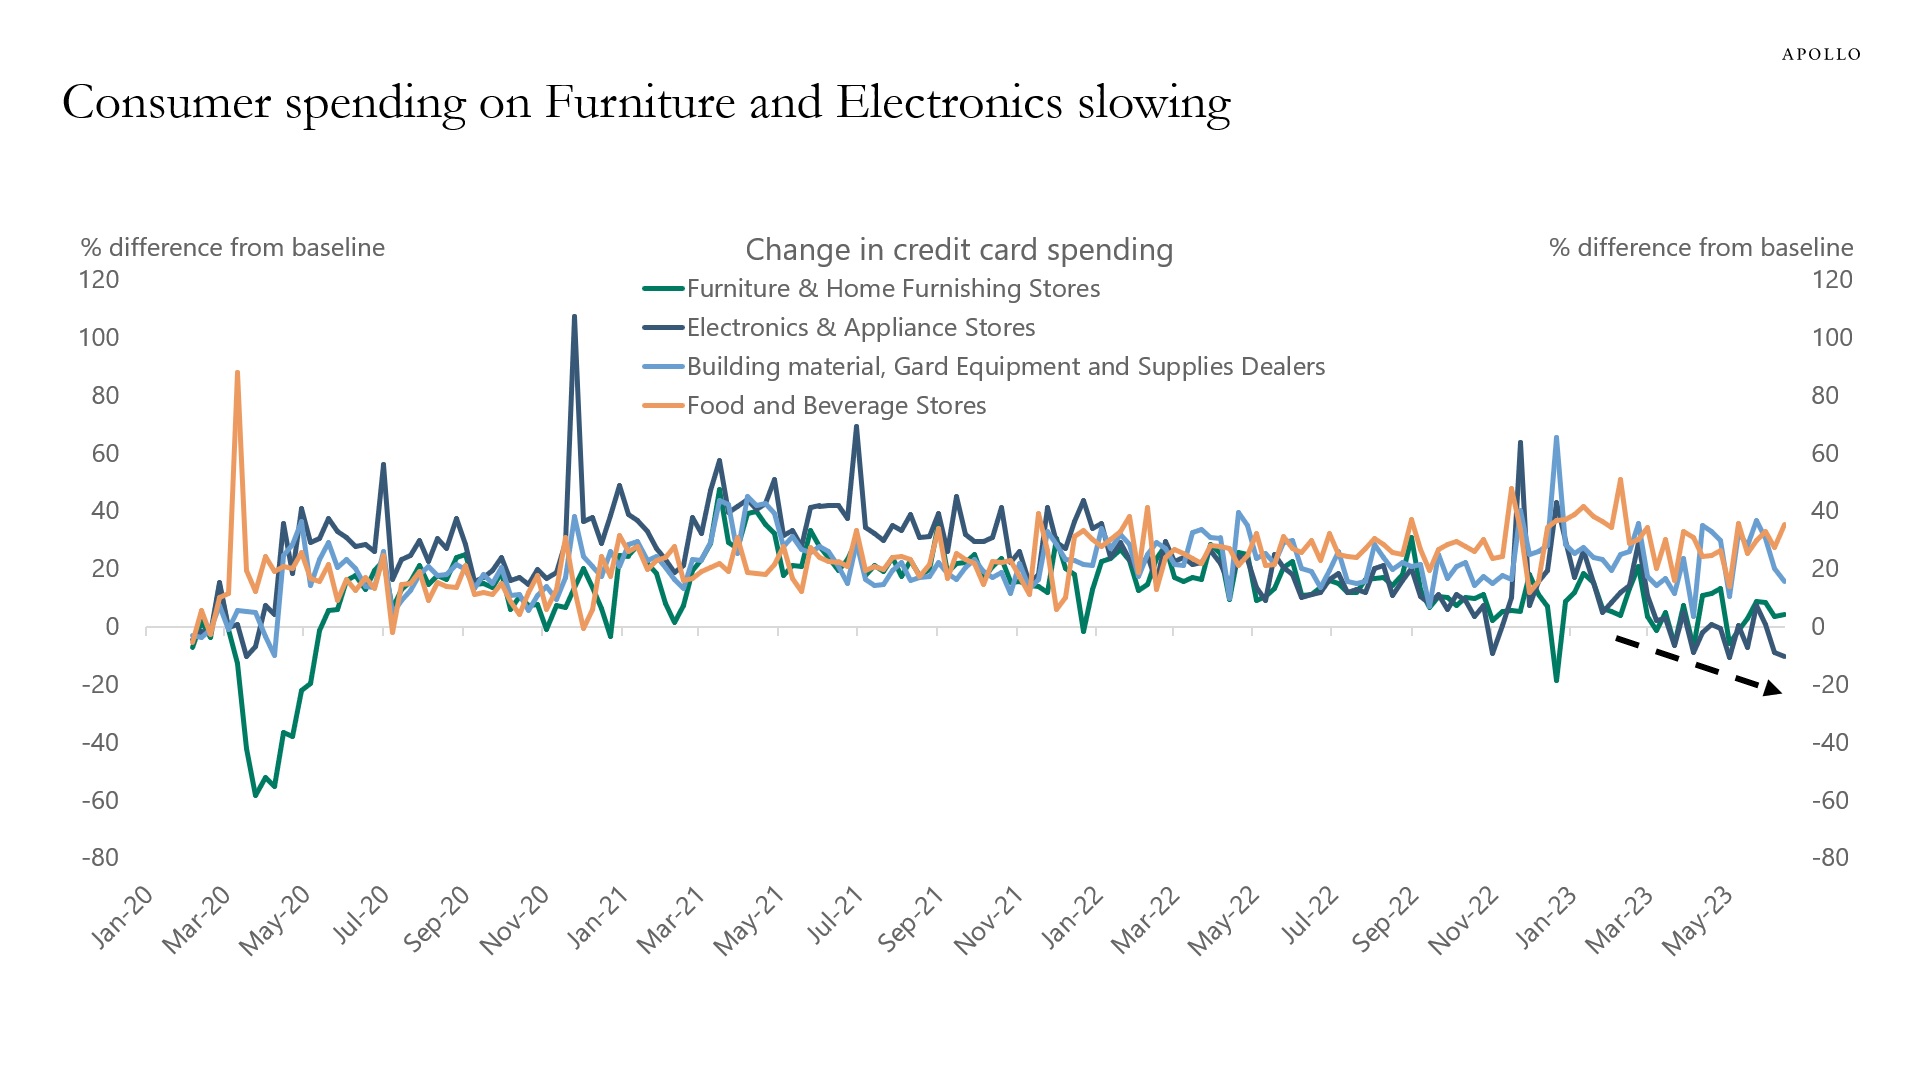 Consumer spending on furniture and electronics are slowing.